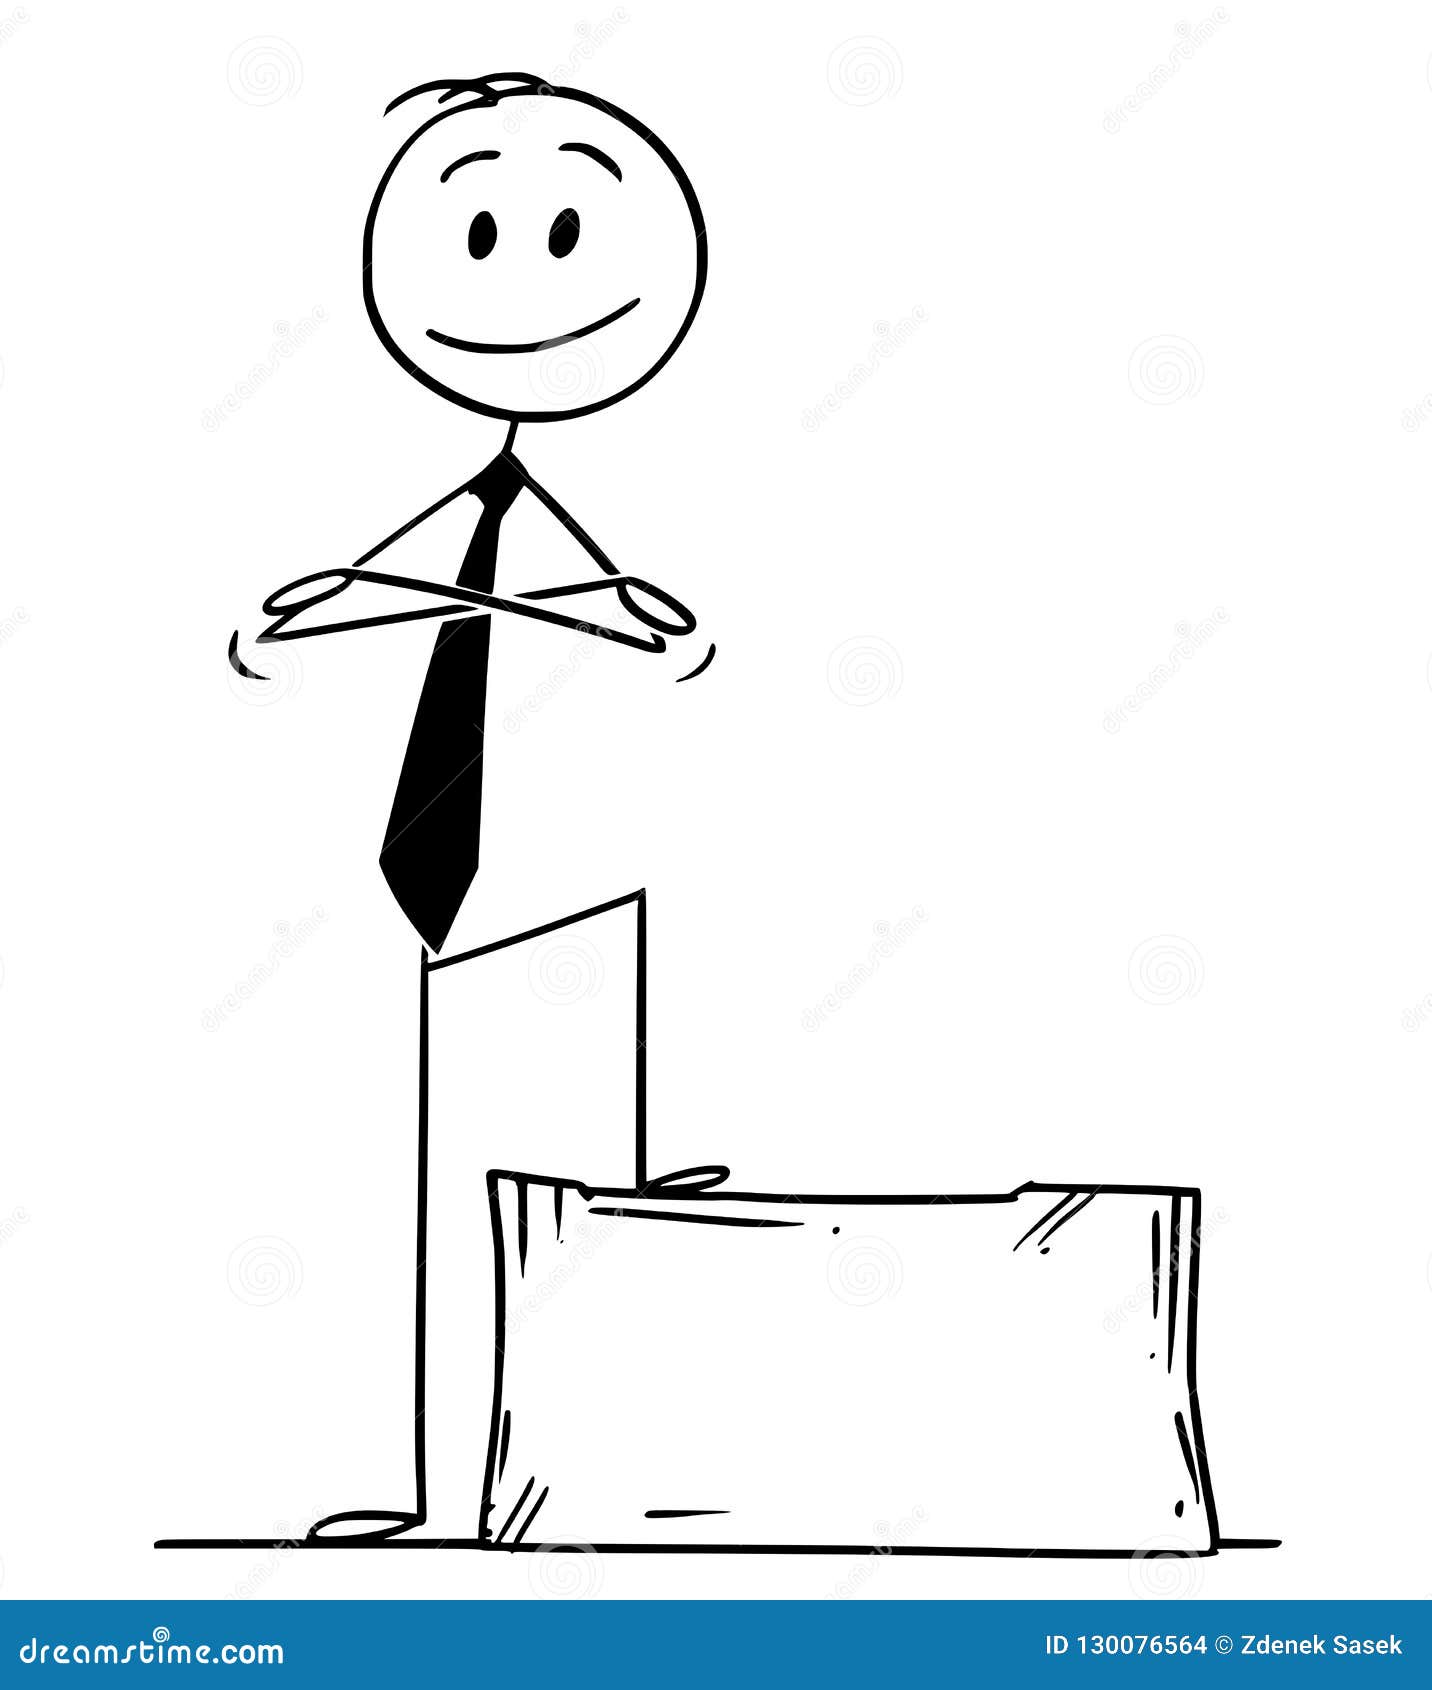 cartoon of confident man or businessman standing on stone block or ashlar with arms crossed